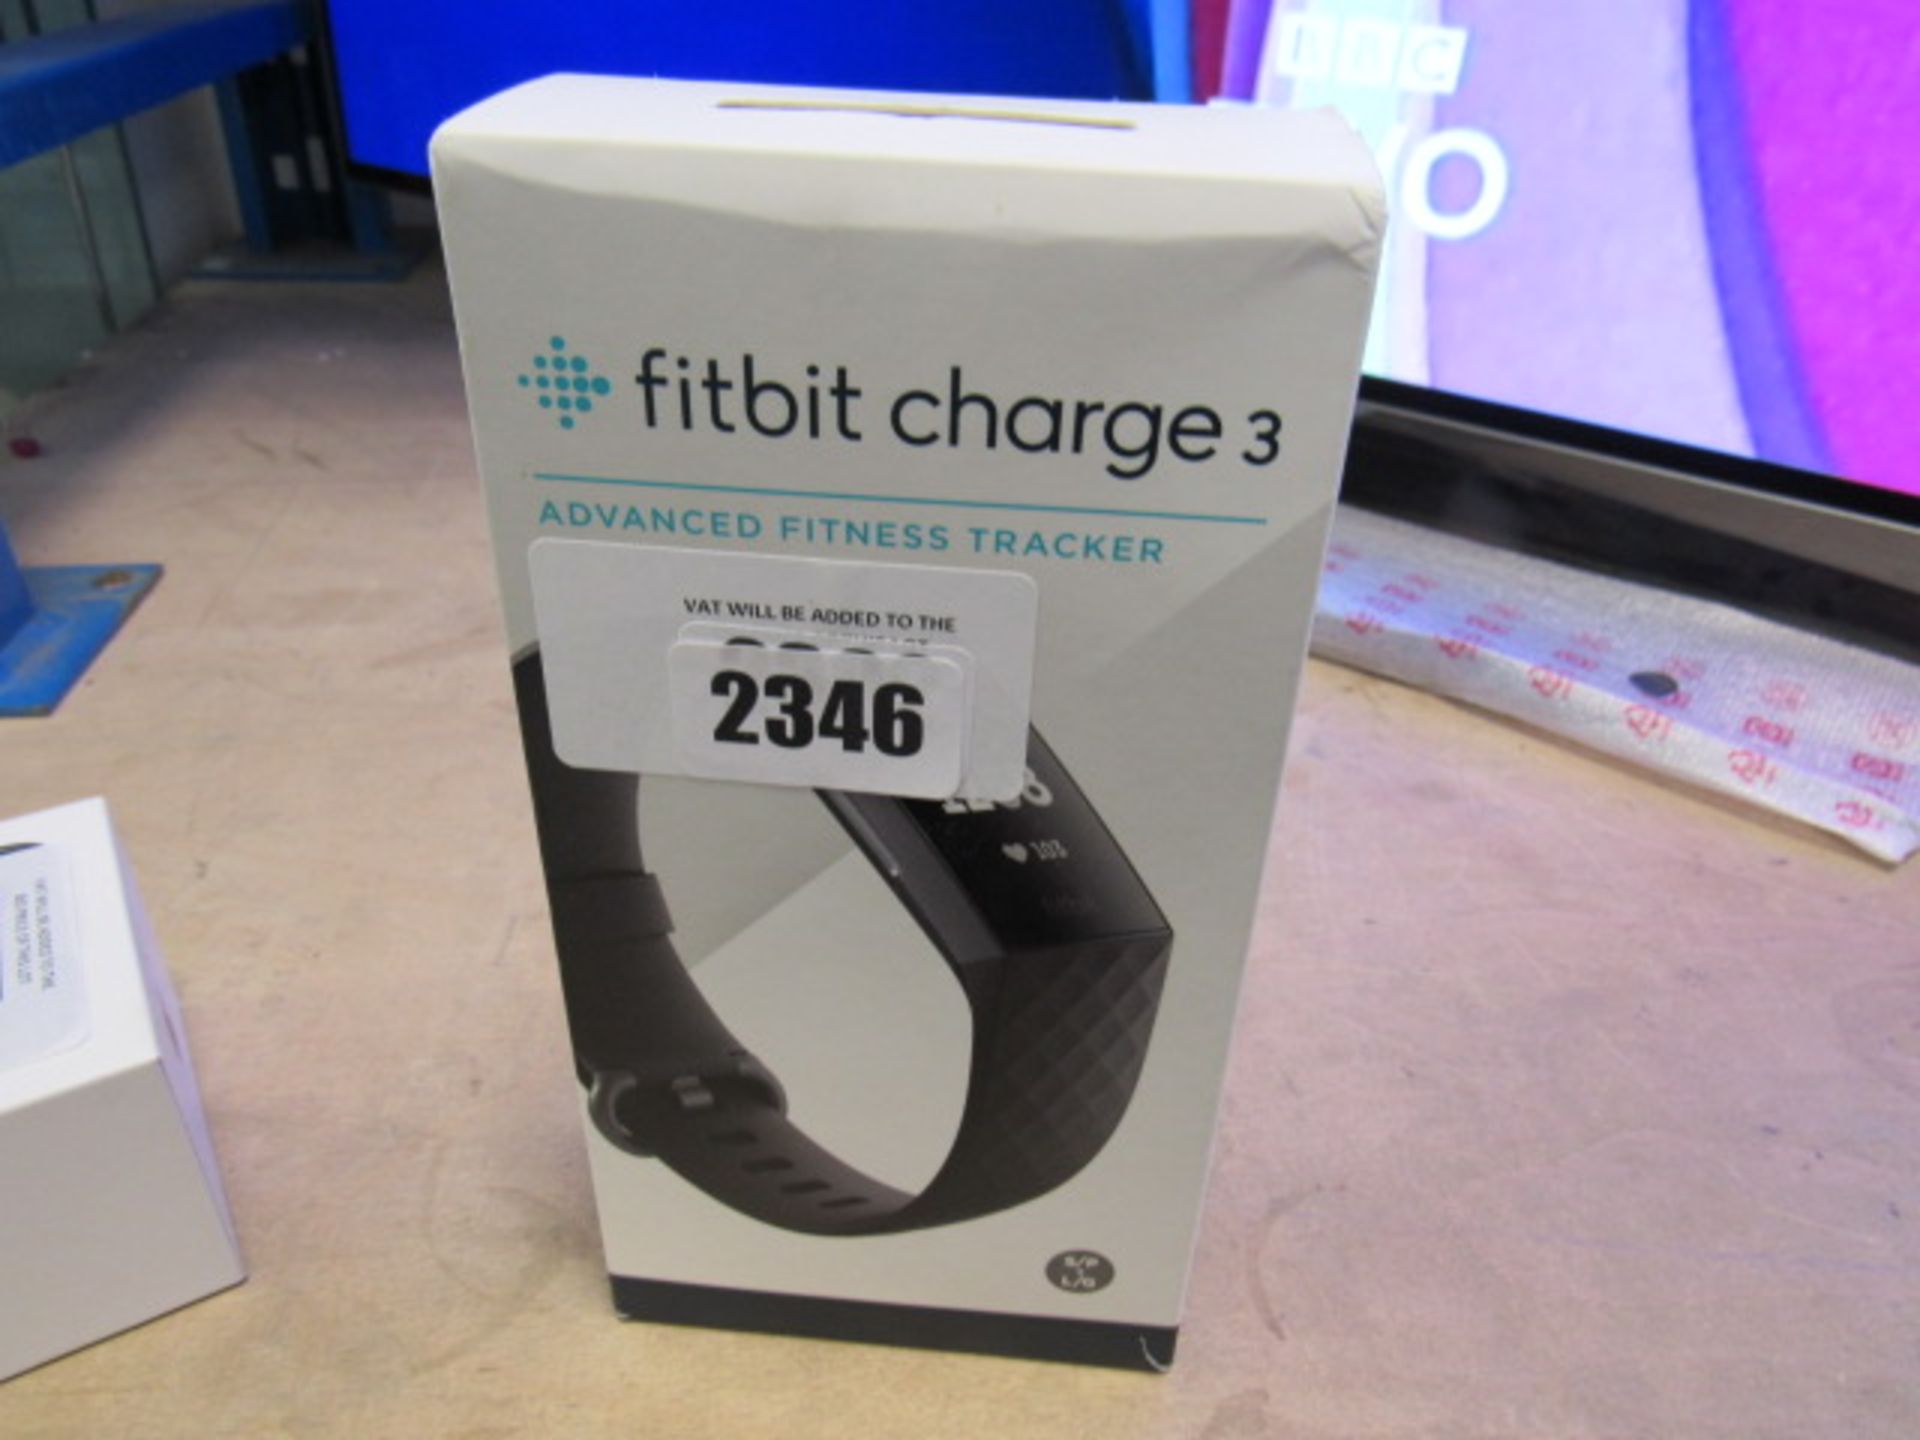 2302 Fitbit charge 3 advance fitness tracker with box